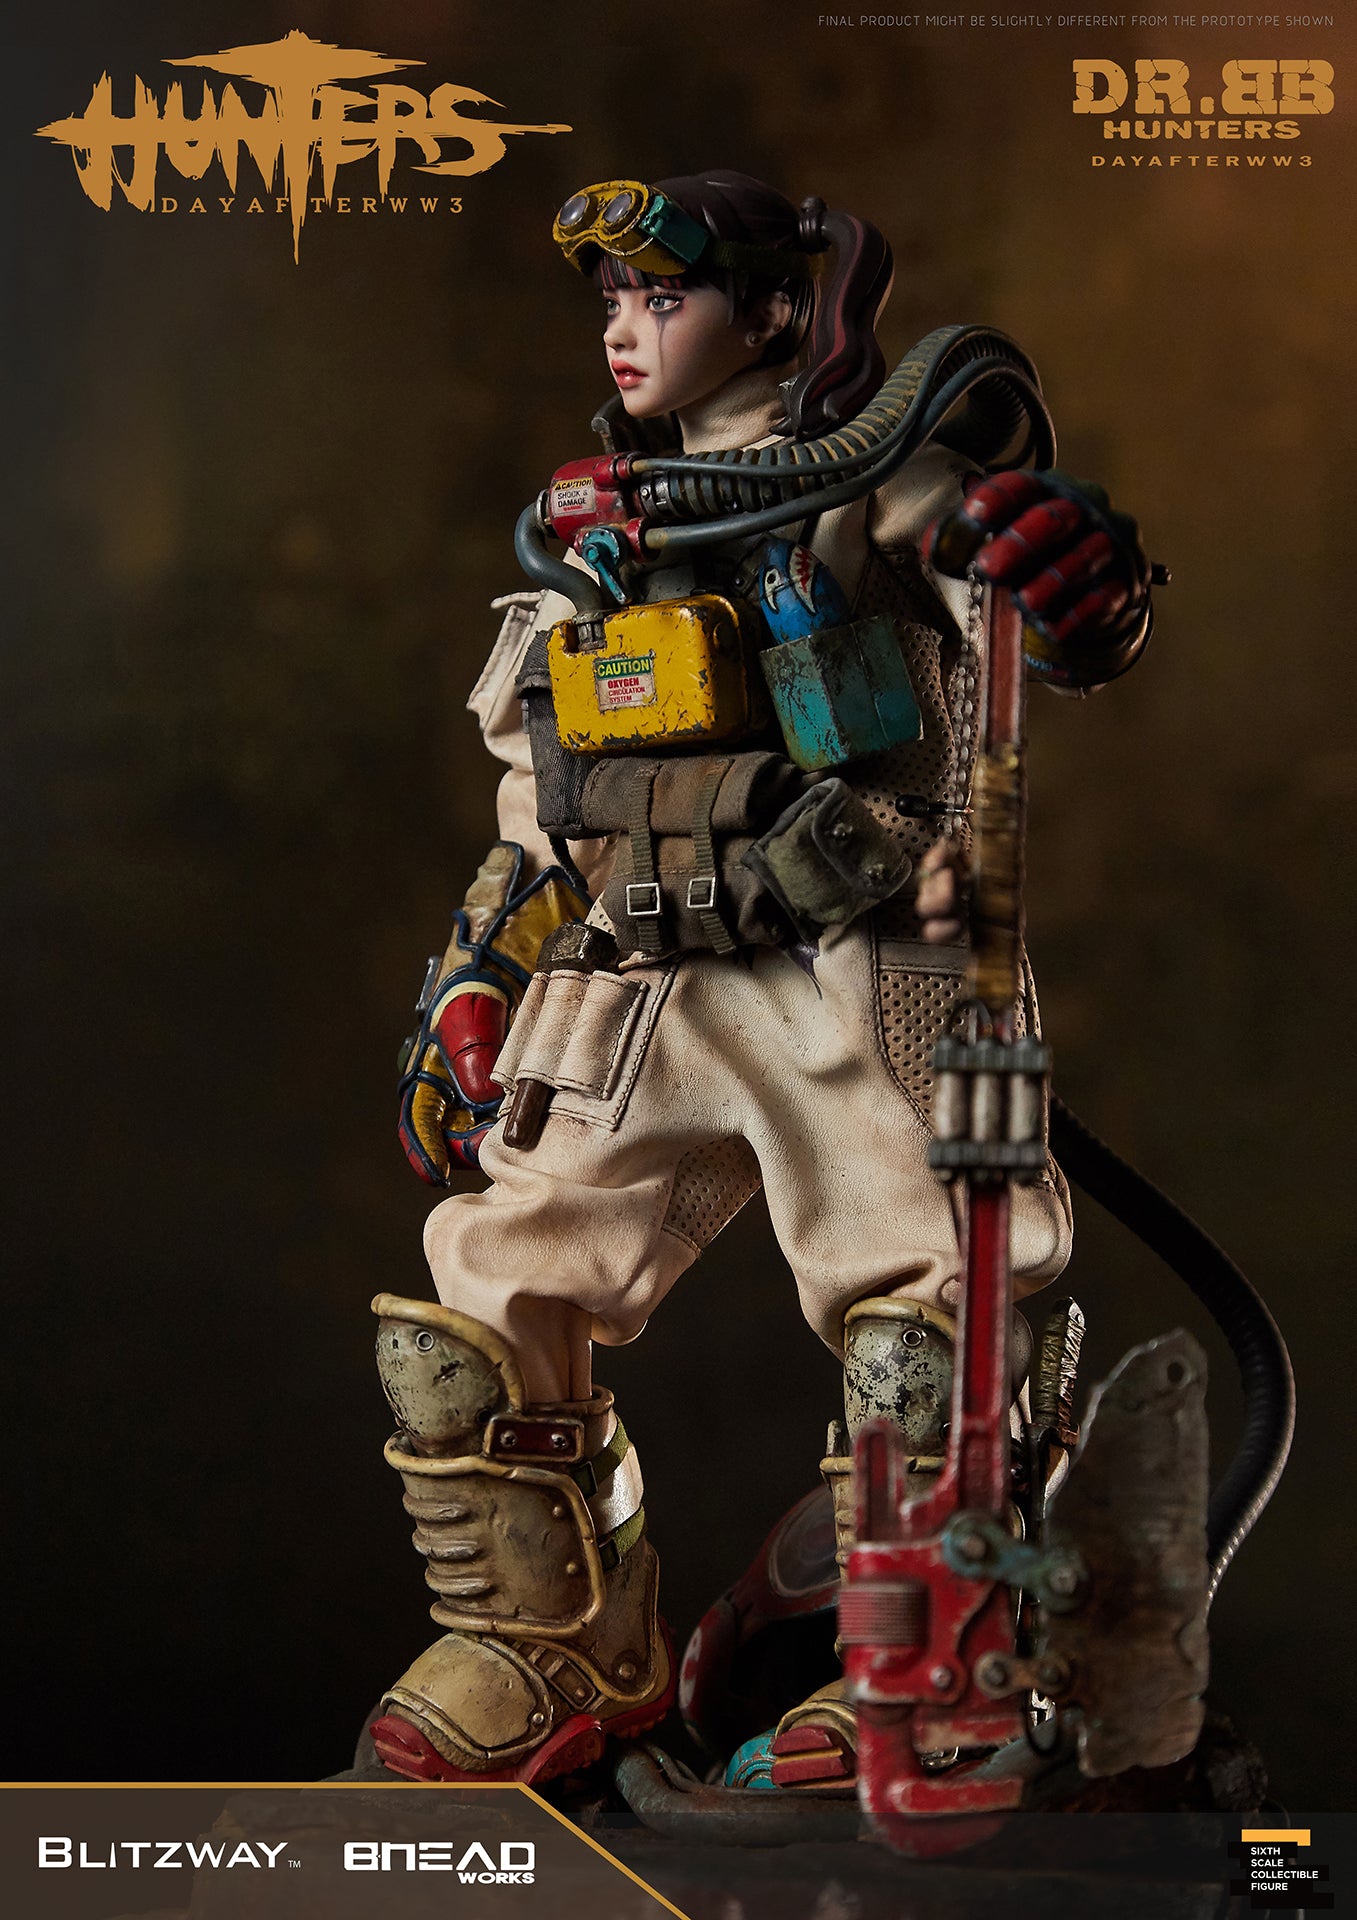 Blitzway - Hunters: Day After WWIII - Dr. BB (1/6 Scale) - Marvelous Toys